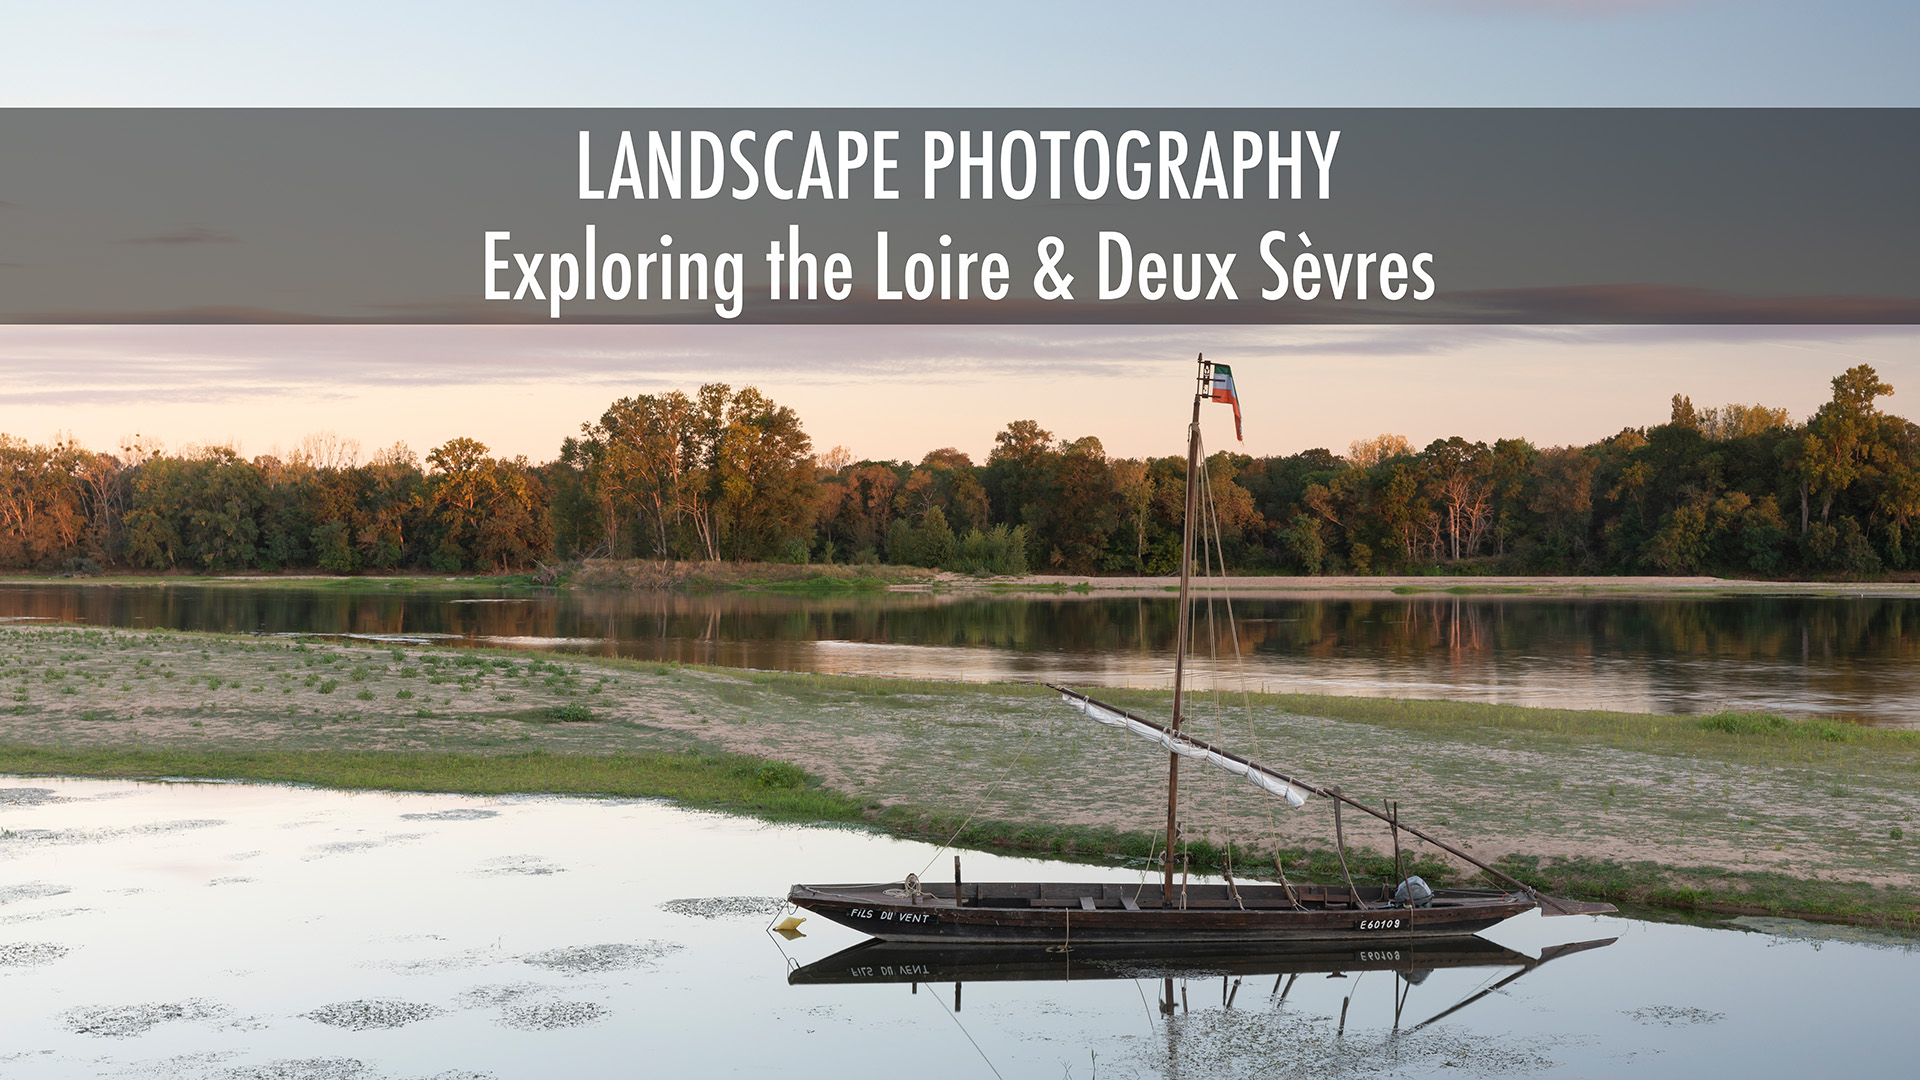 Exploring the Loire Valley and Deux Sevres. Landscape photography in France.